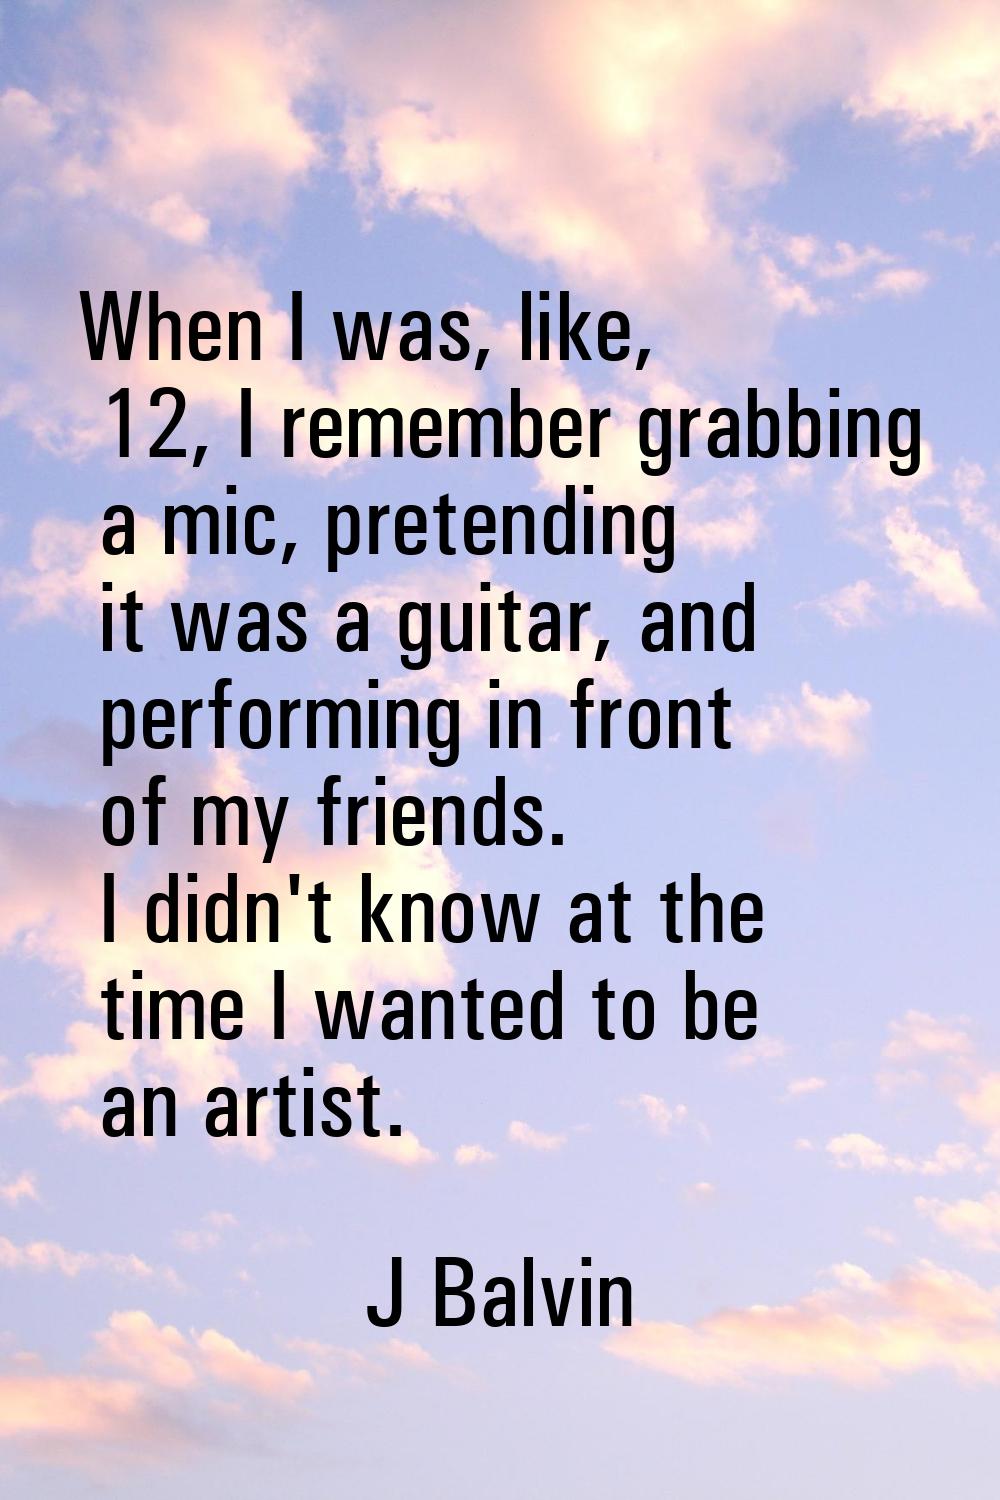 When I was, like, 12, I remember grabbing a mic, pretending it was a guitar, and performing in fron